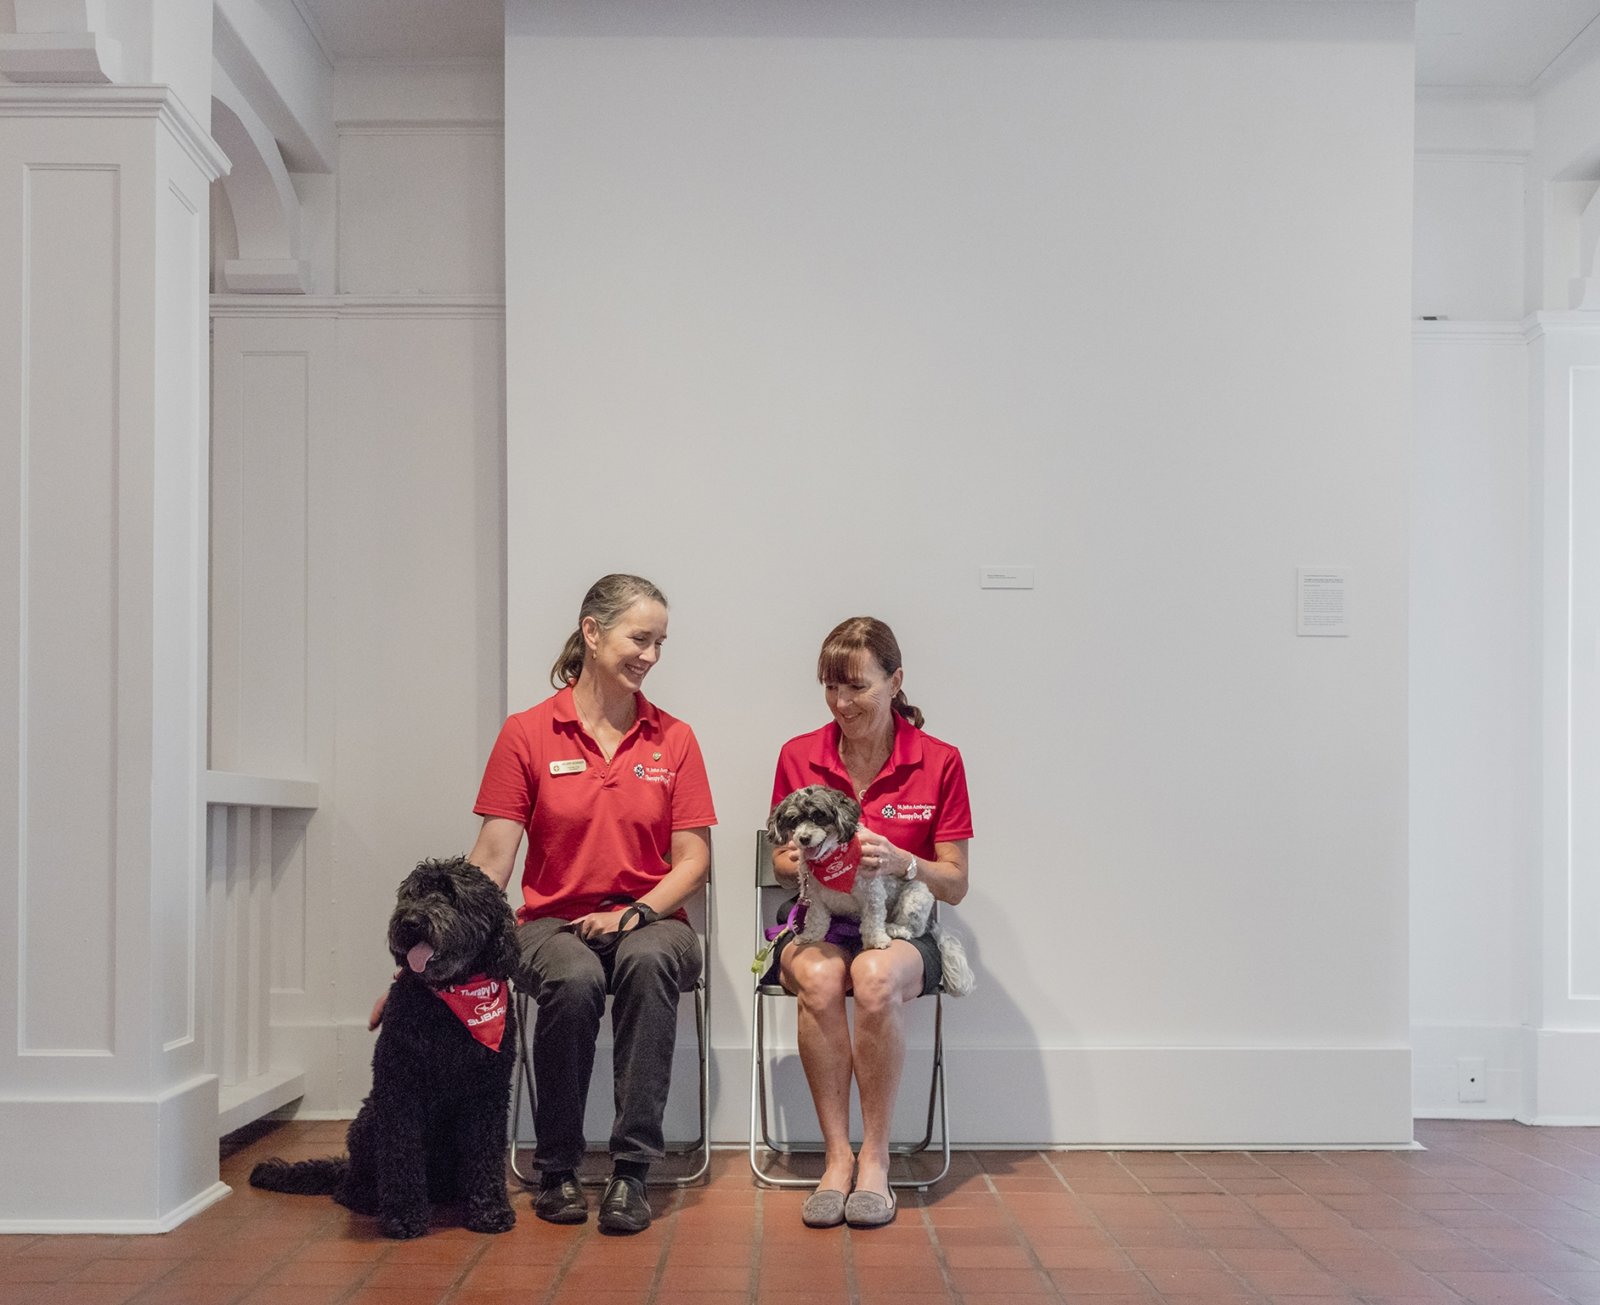 Abbas Akhavan, Untitled, 2017, 2 chairs, 2 therapy dogs with handlers, dimensions variable. Installation view, Propped, Oakville Galleries, Oakville, Canada, 2017